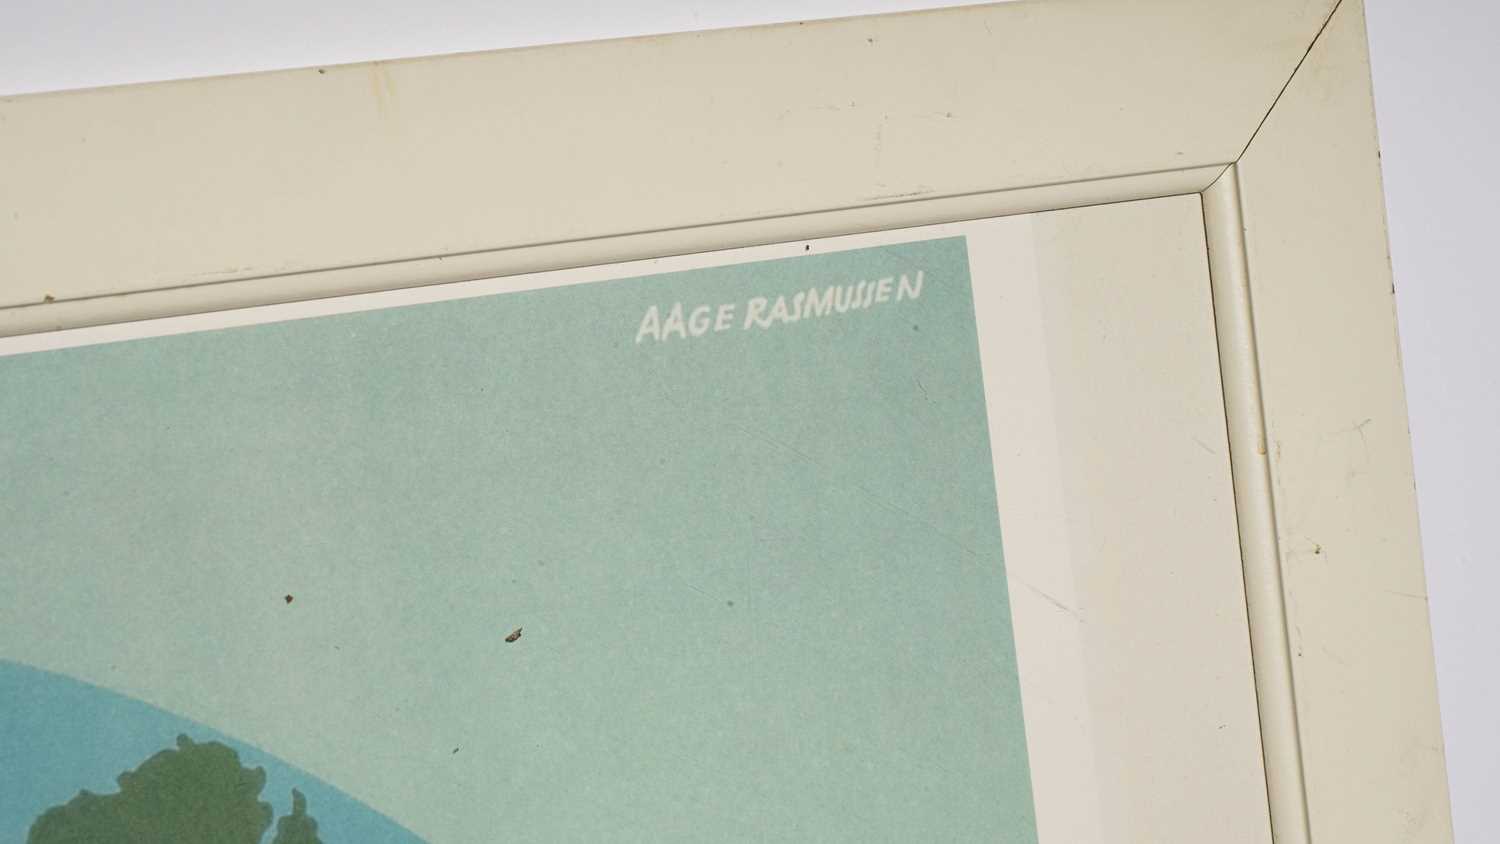 After Aage Rasmussen - Maersk Line and Odense advertising posters | offset lithographic prints - Image 5 of 10